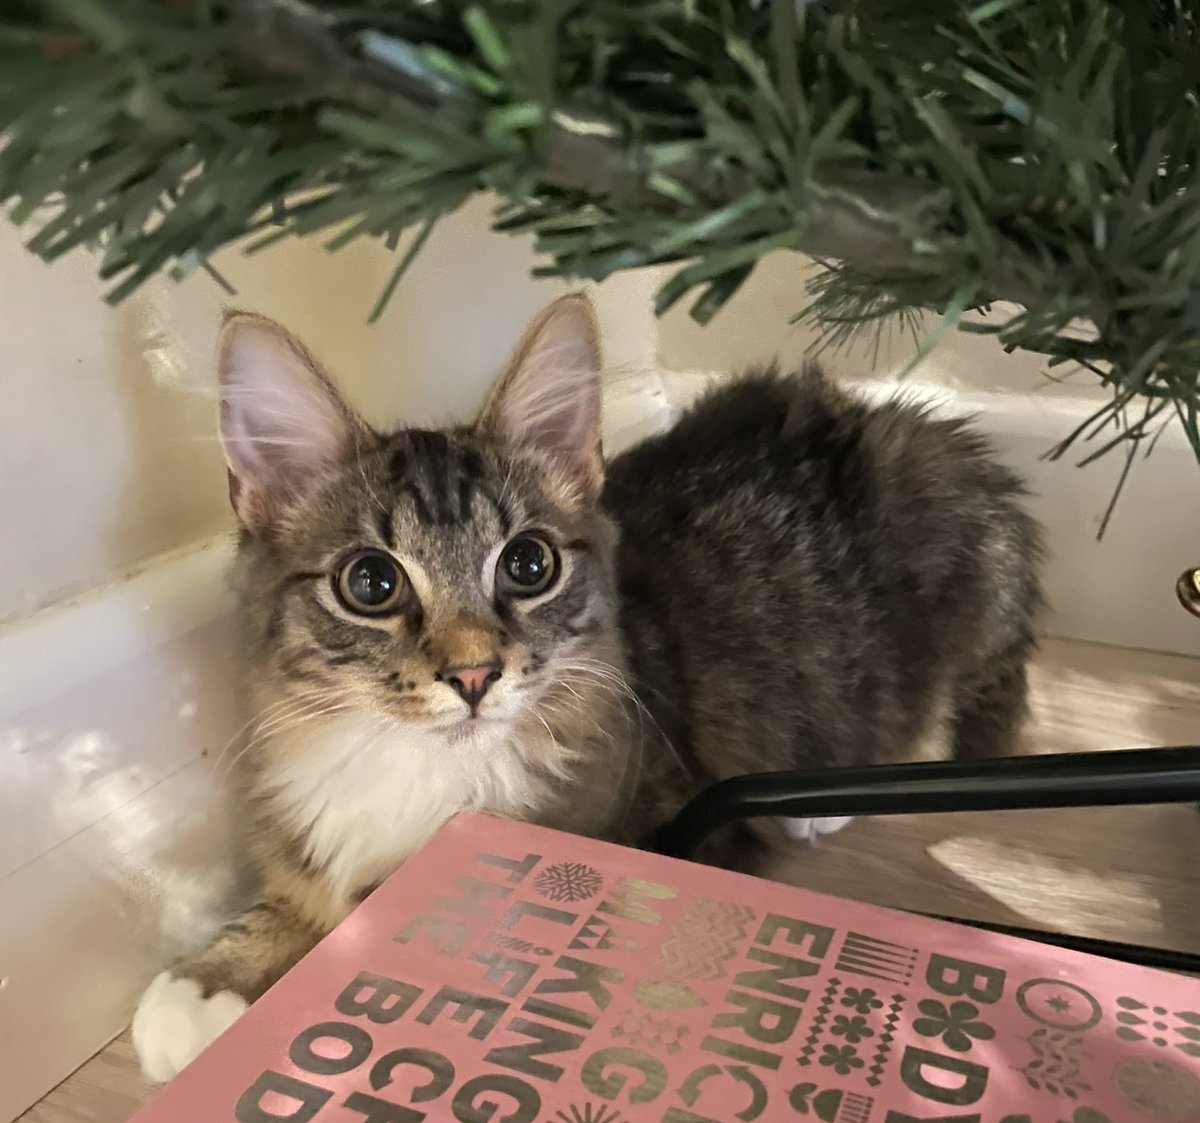 RT @Thor_tabby: I’m the mighty Thor. Guardian of the Christmas tree! #kittyloafmonday #catsatchristmas https://t.co/jQgx9qDzyv